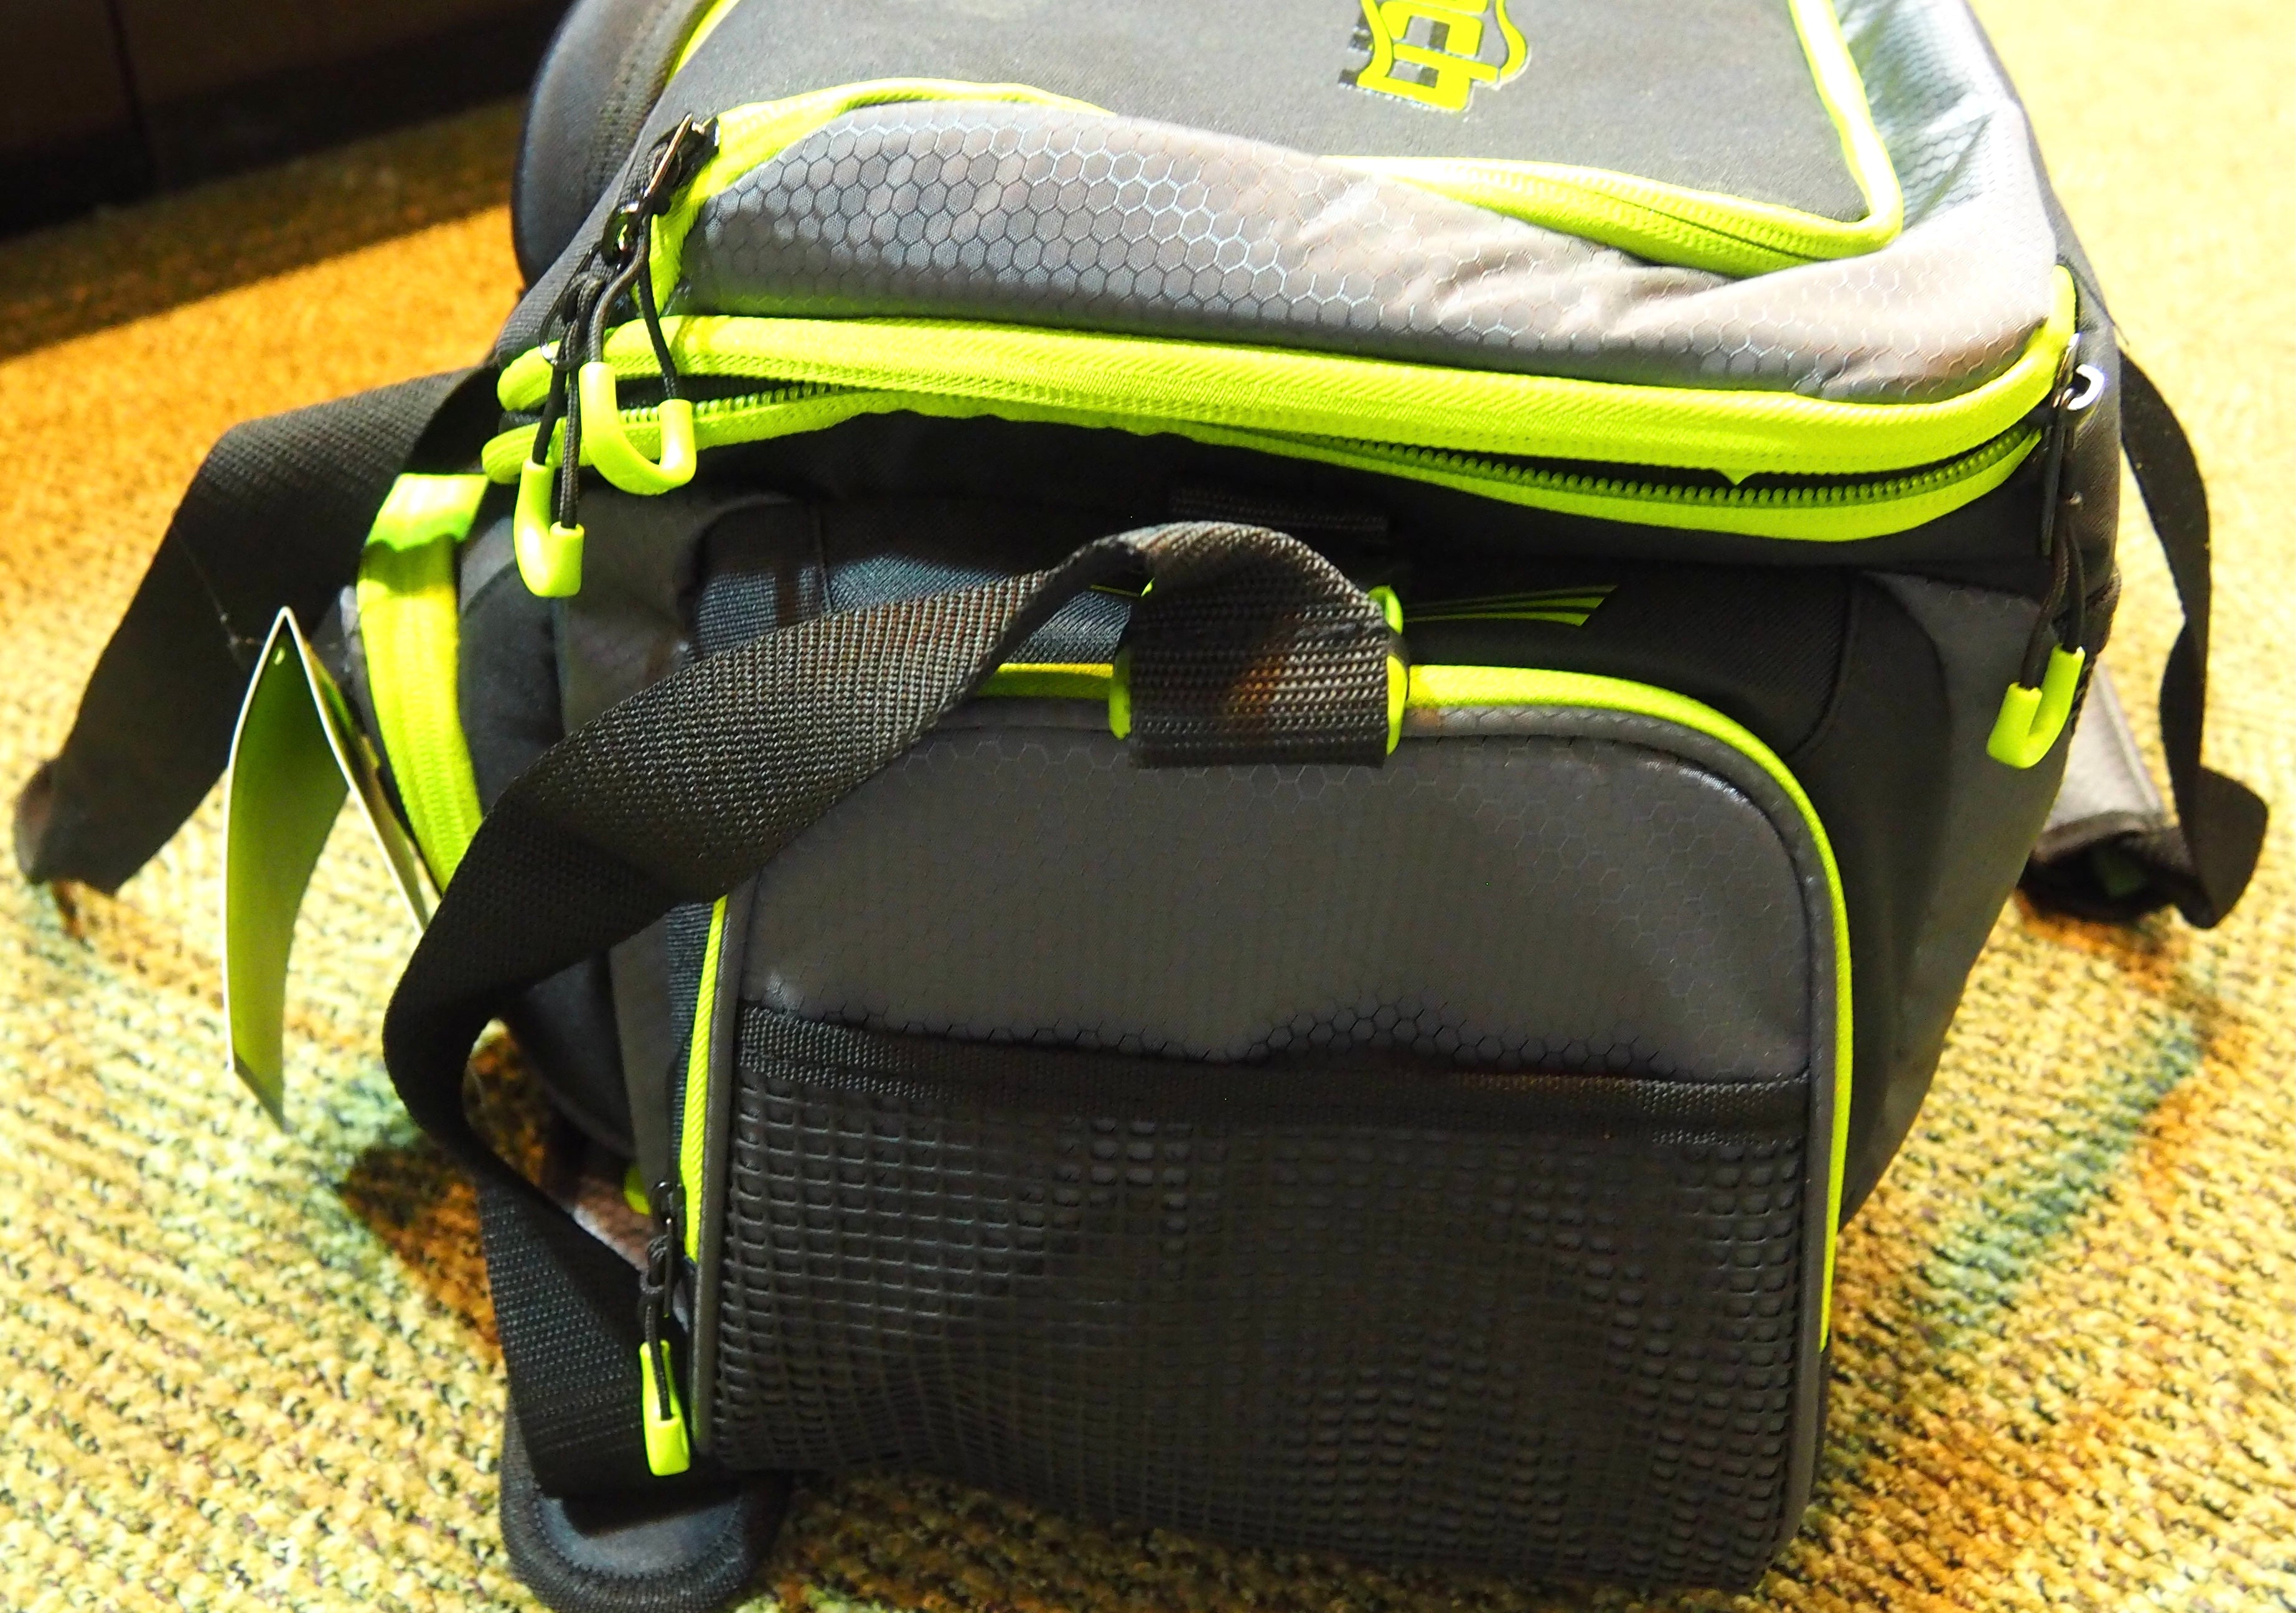 NEW Lew's Mach Tackle Bag Offers Storage, Durability